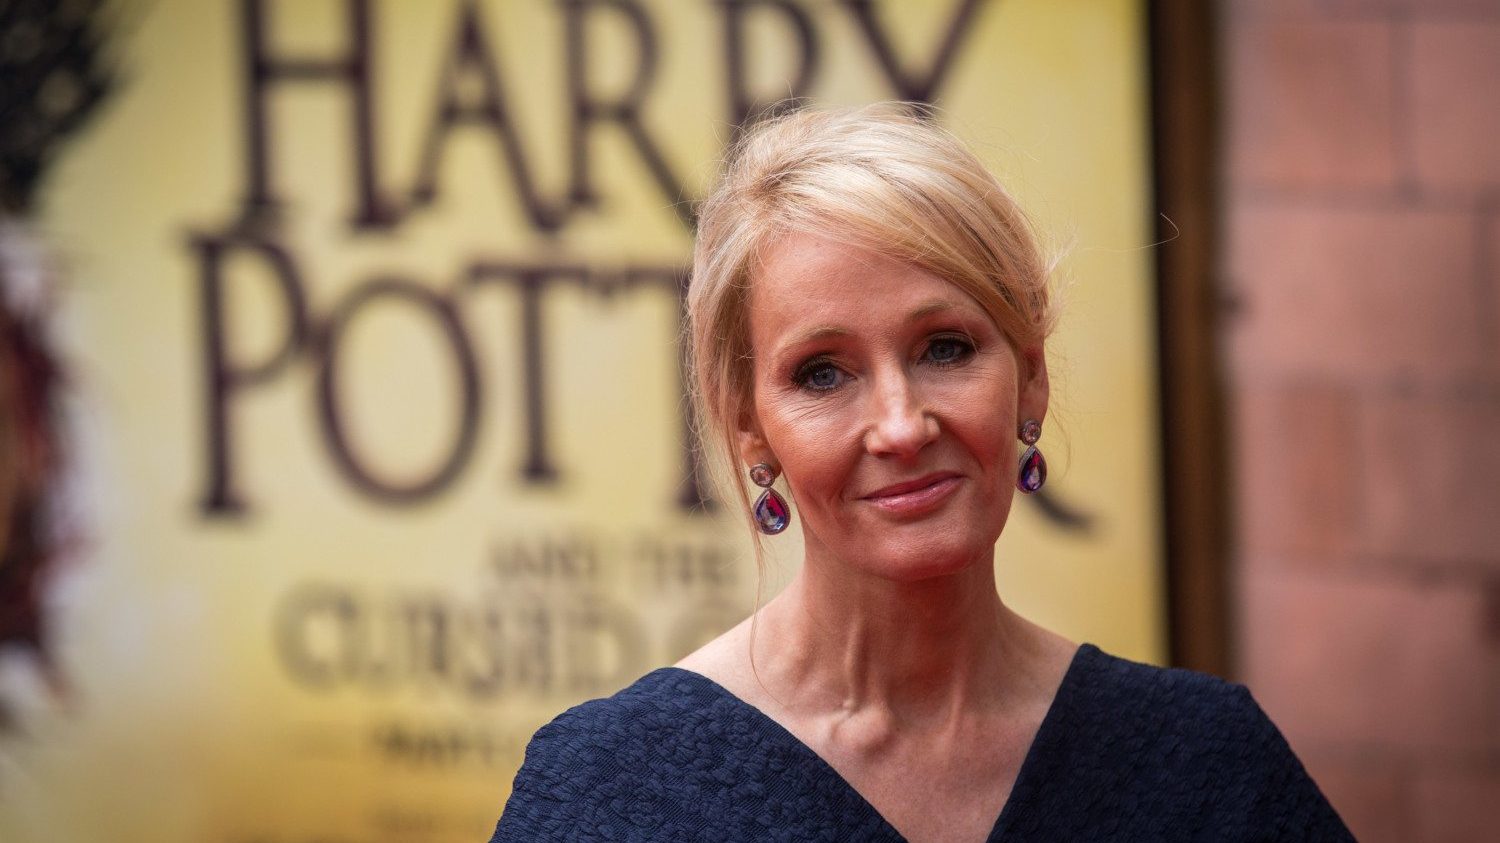 'Harry Potter & The Cursed Child' - Press Preview - Arrivals